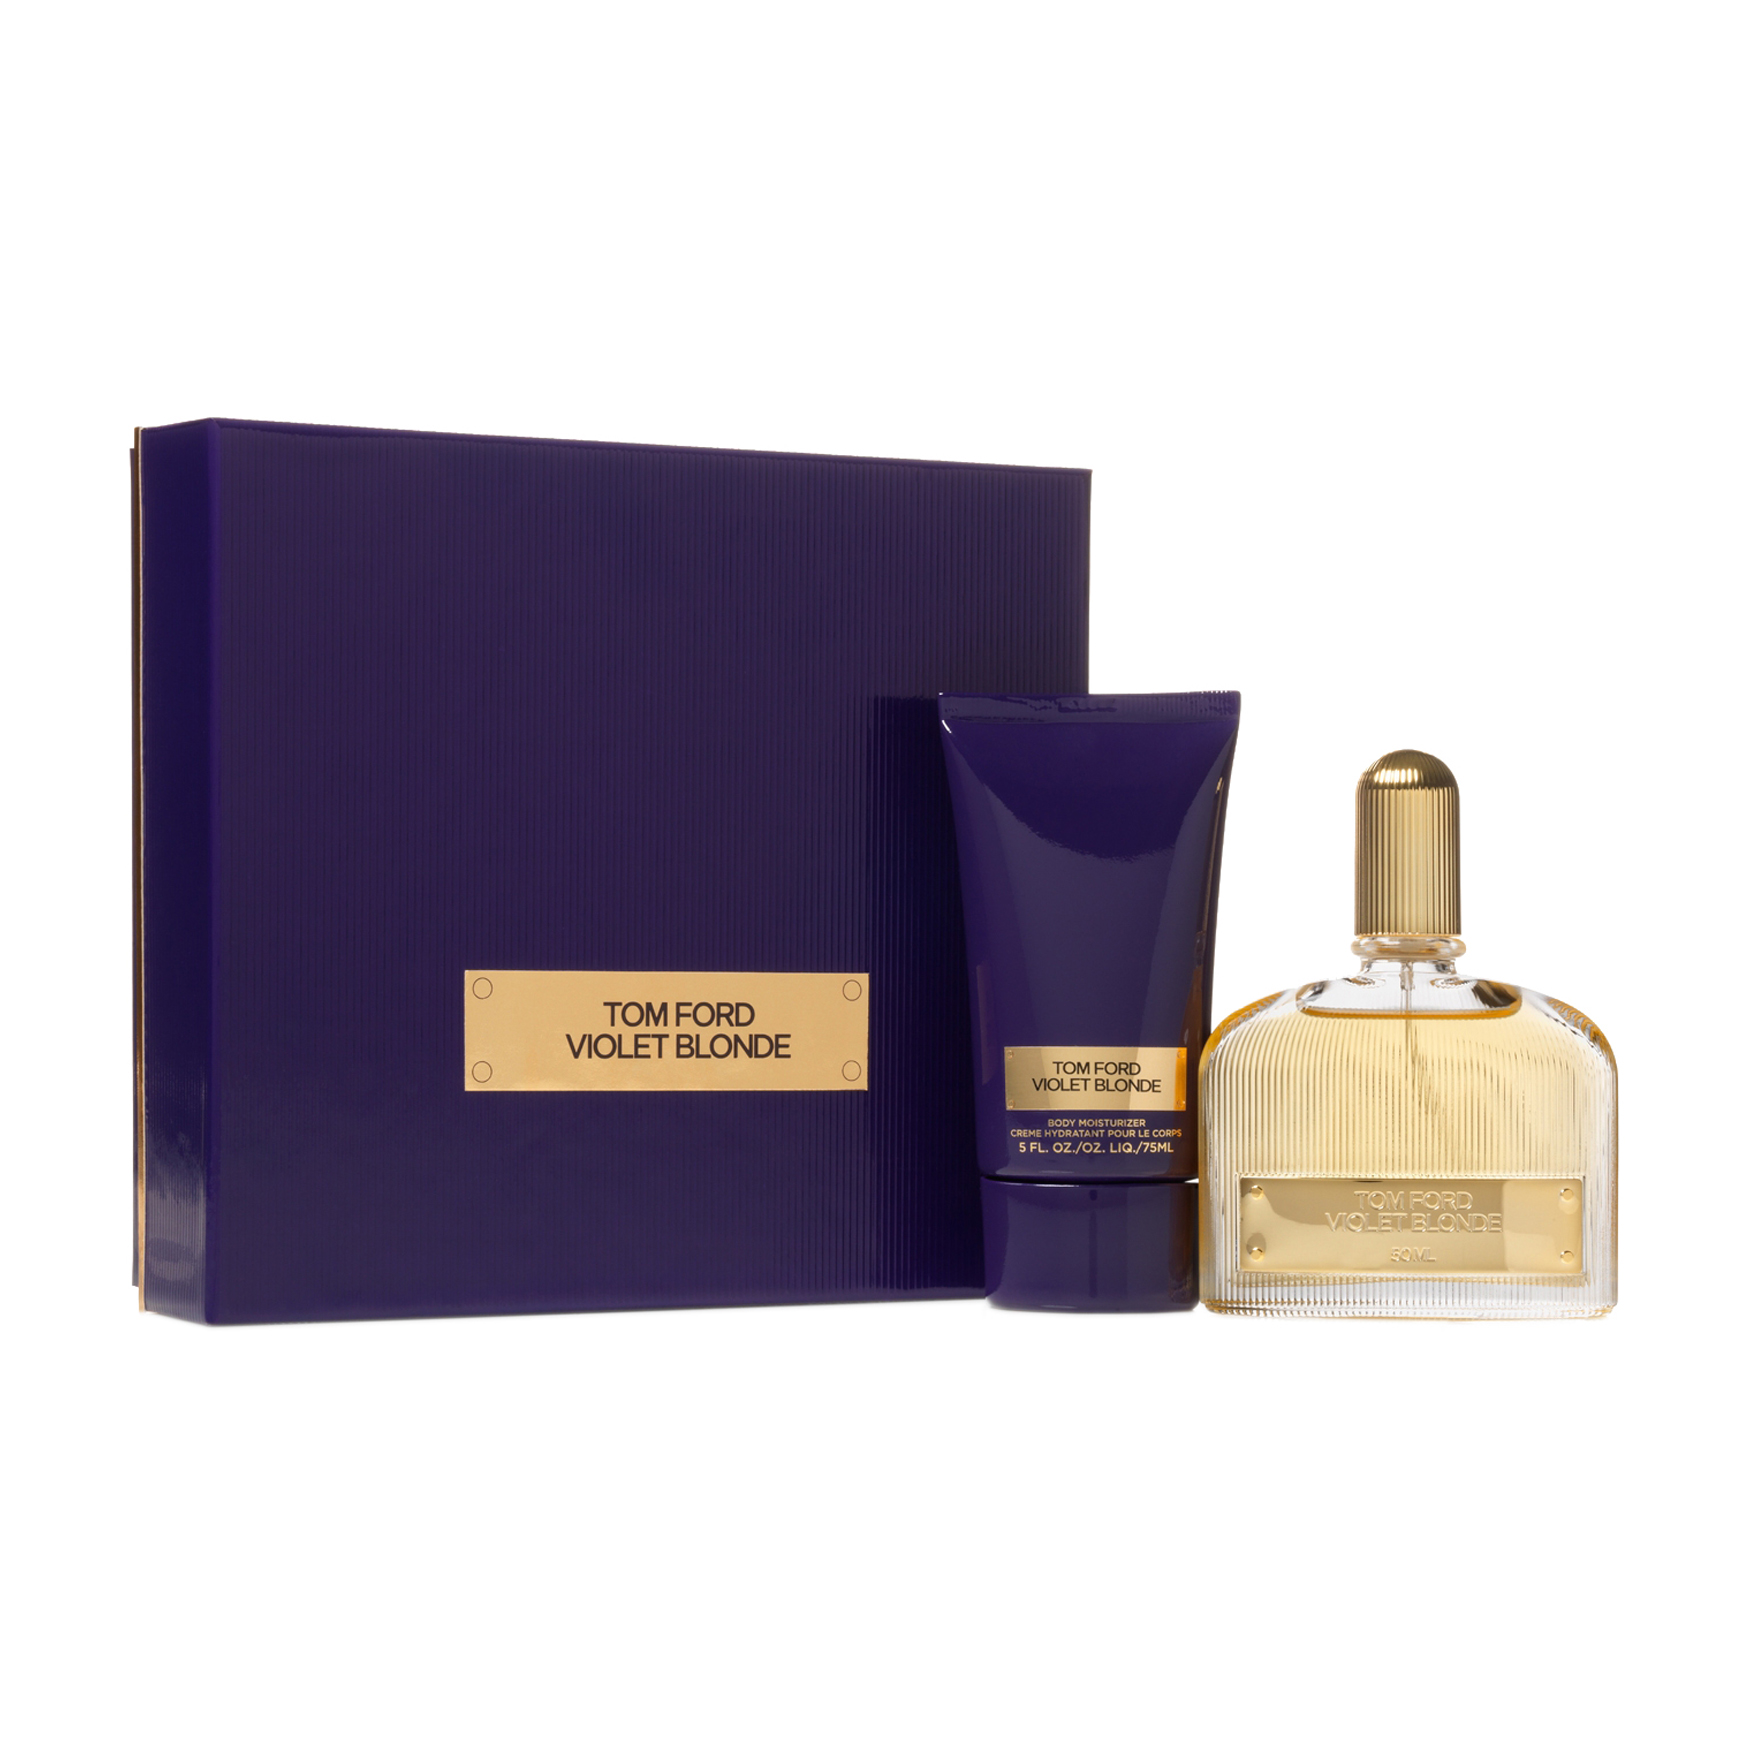 TOM FORD Violet Blonde Collection | Space NK